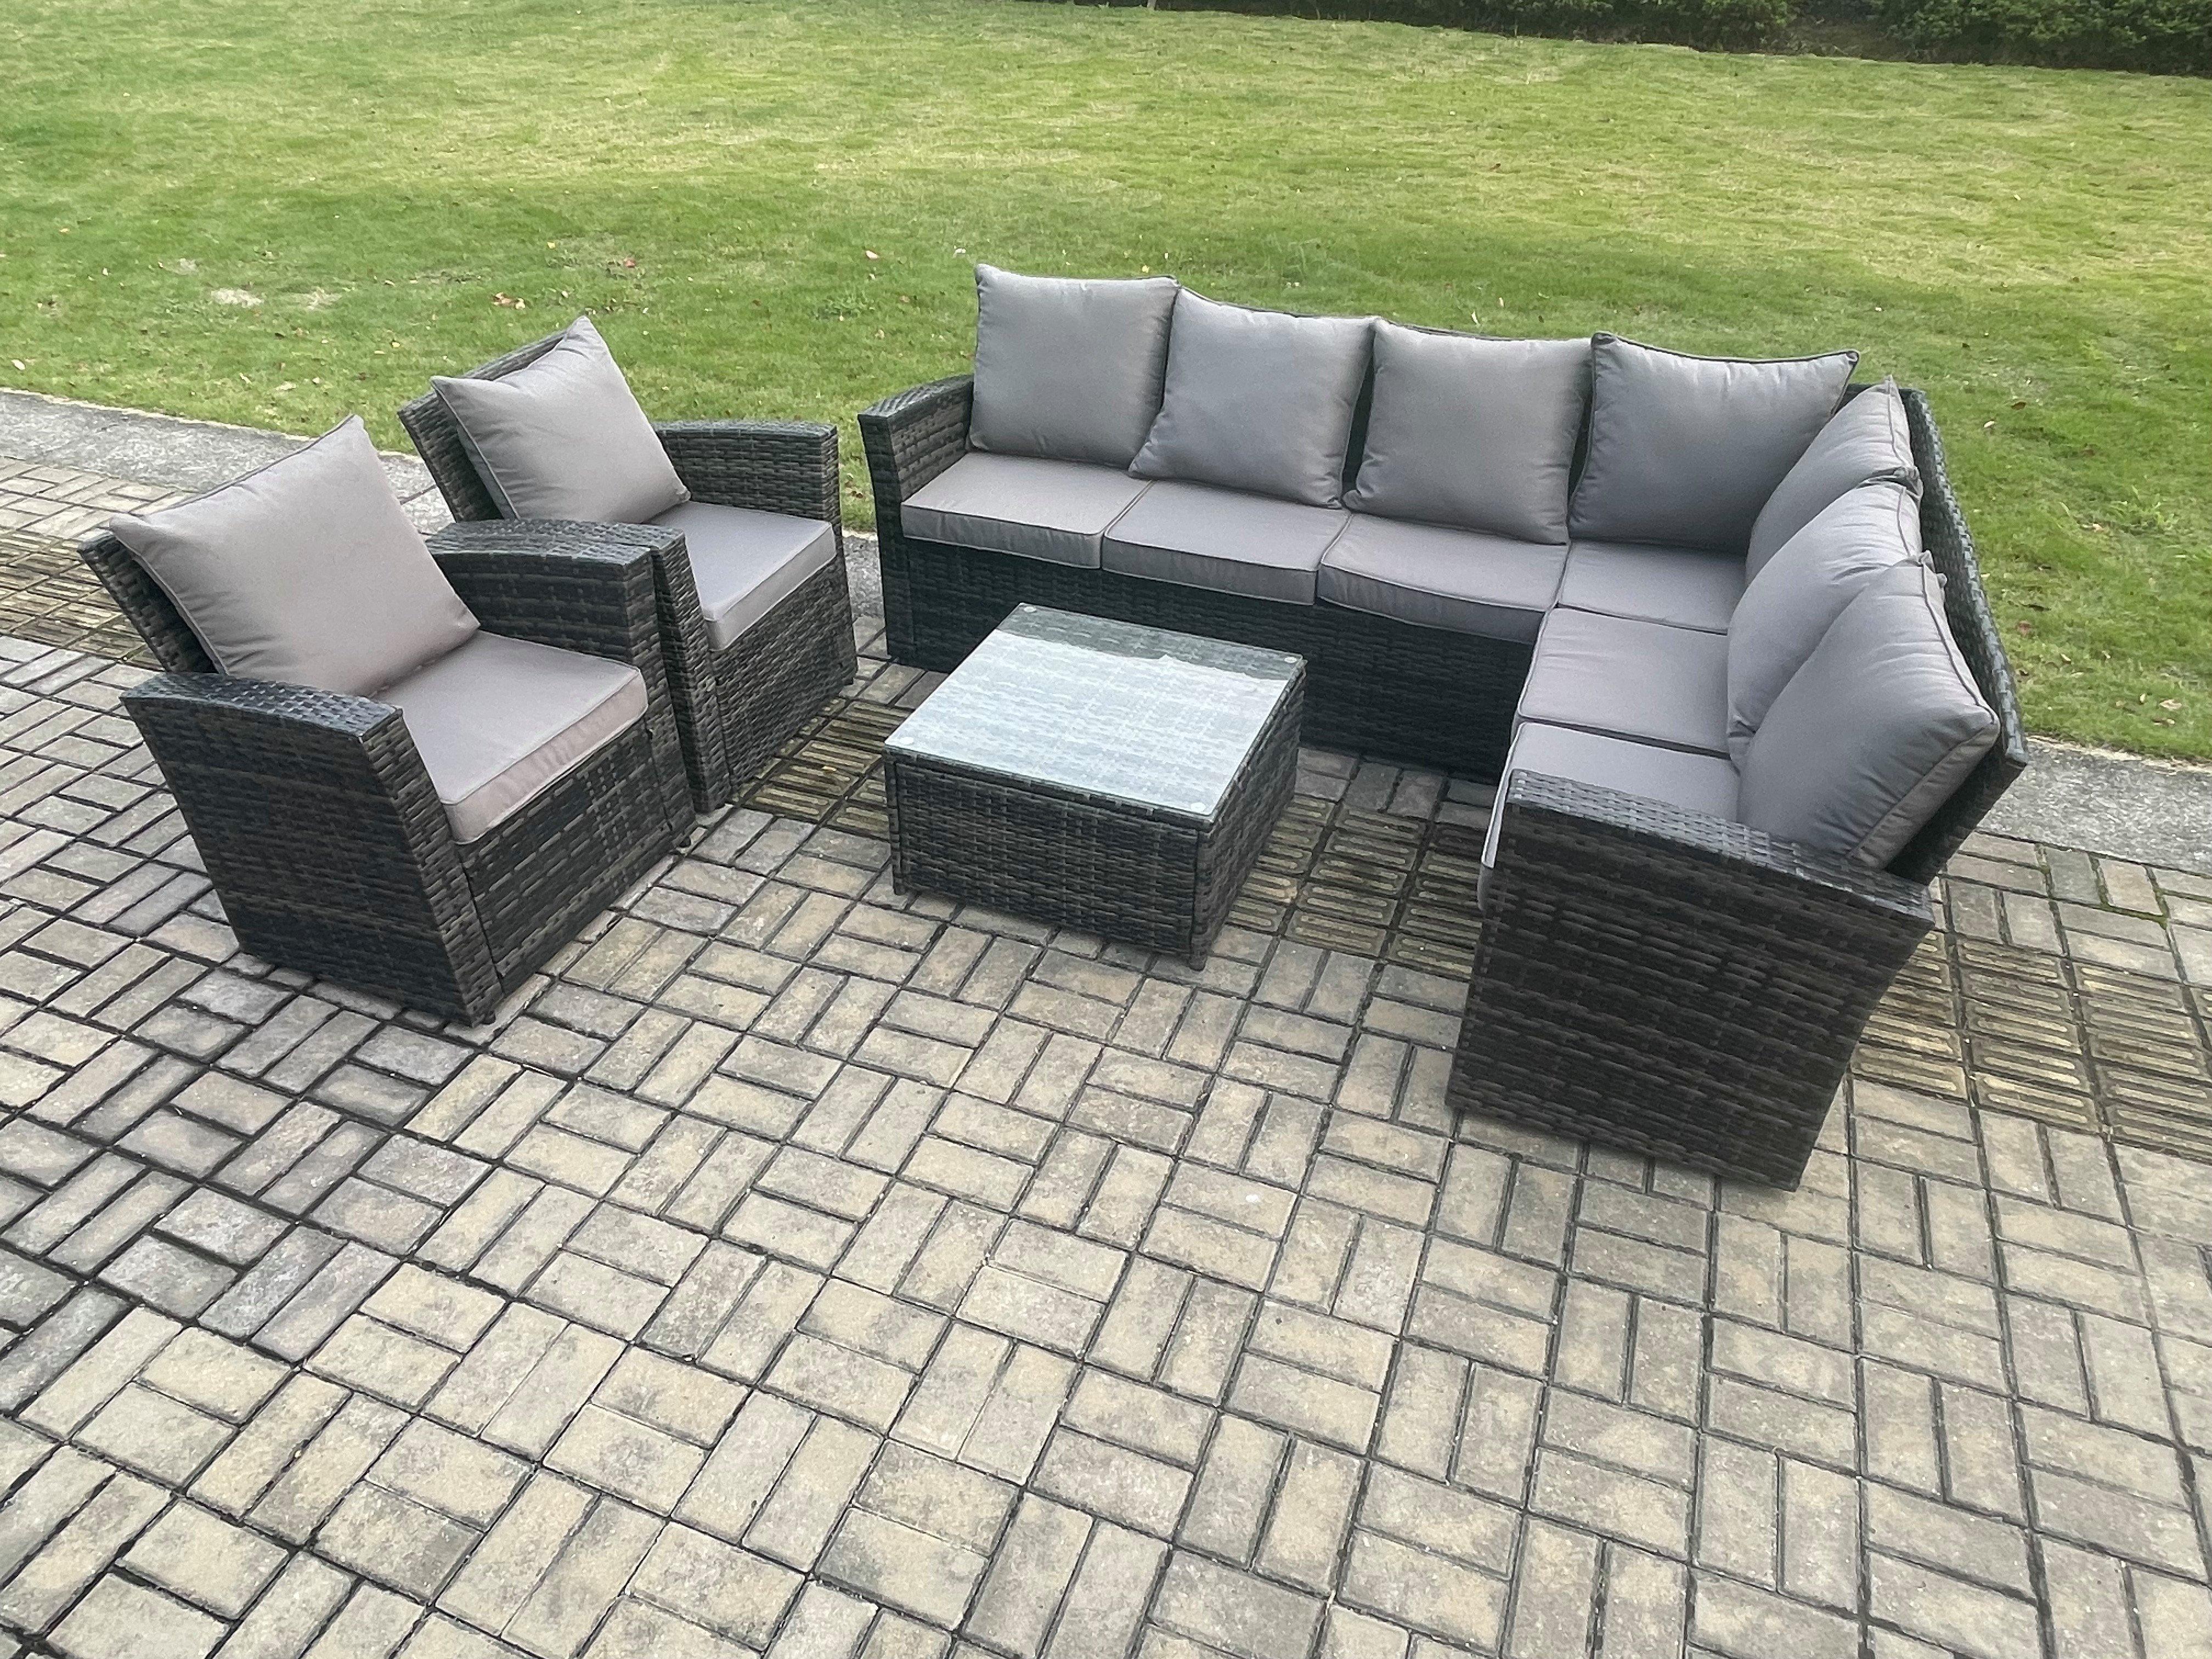 Rattan Garden Furniture Set Outdoor Lounge Corner Sofa Set With Square Coffee Table 2 Chairs 8 Seate